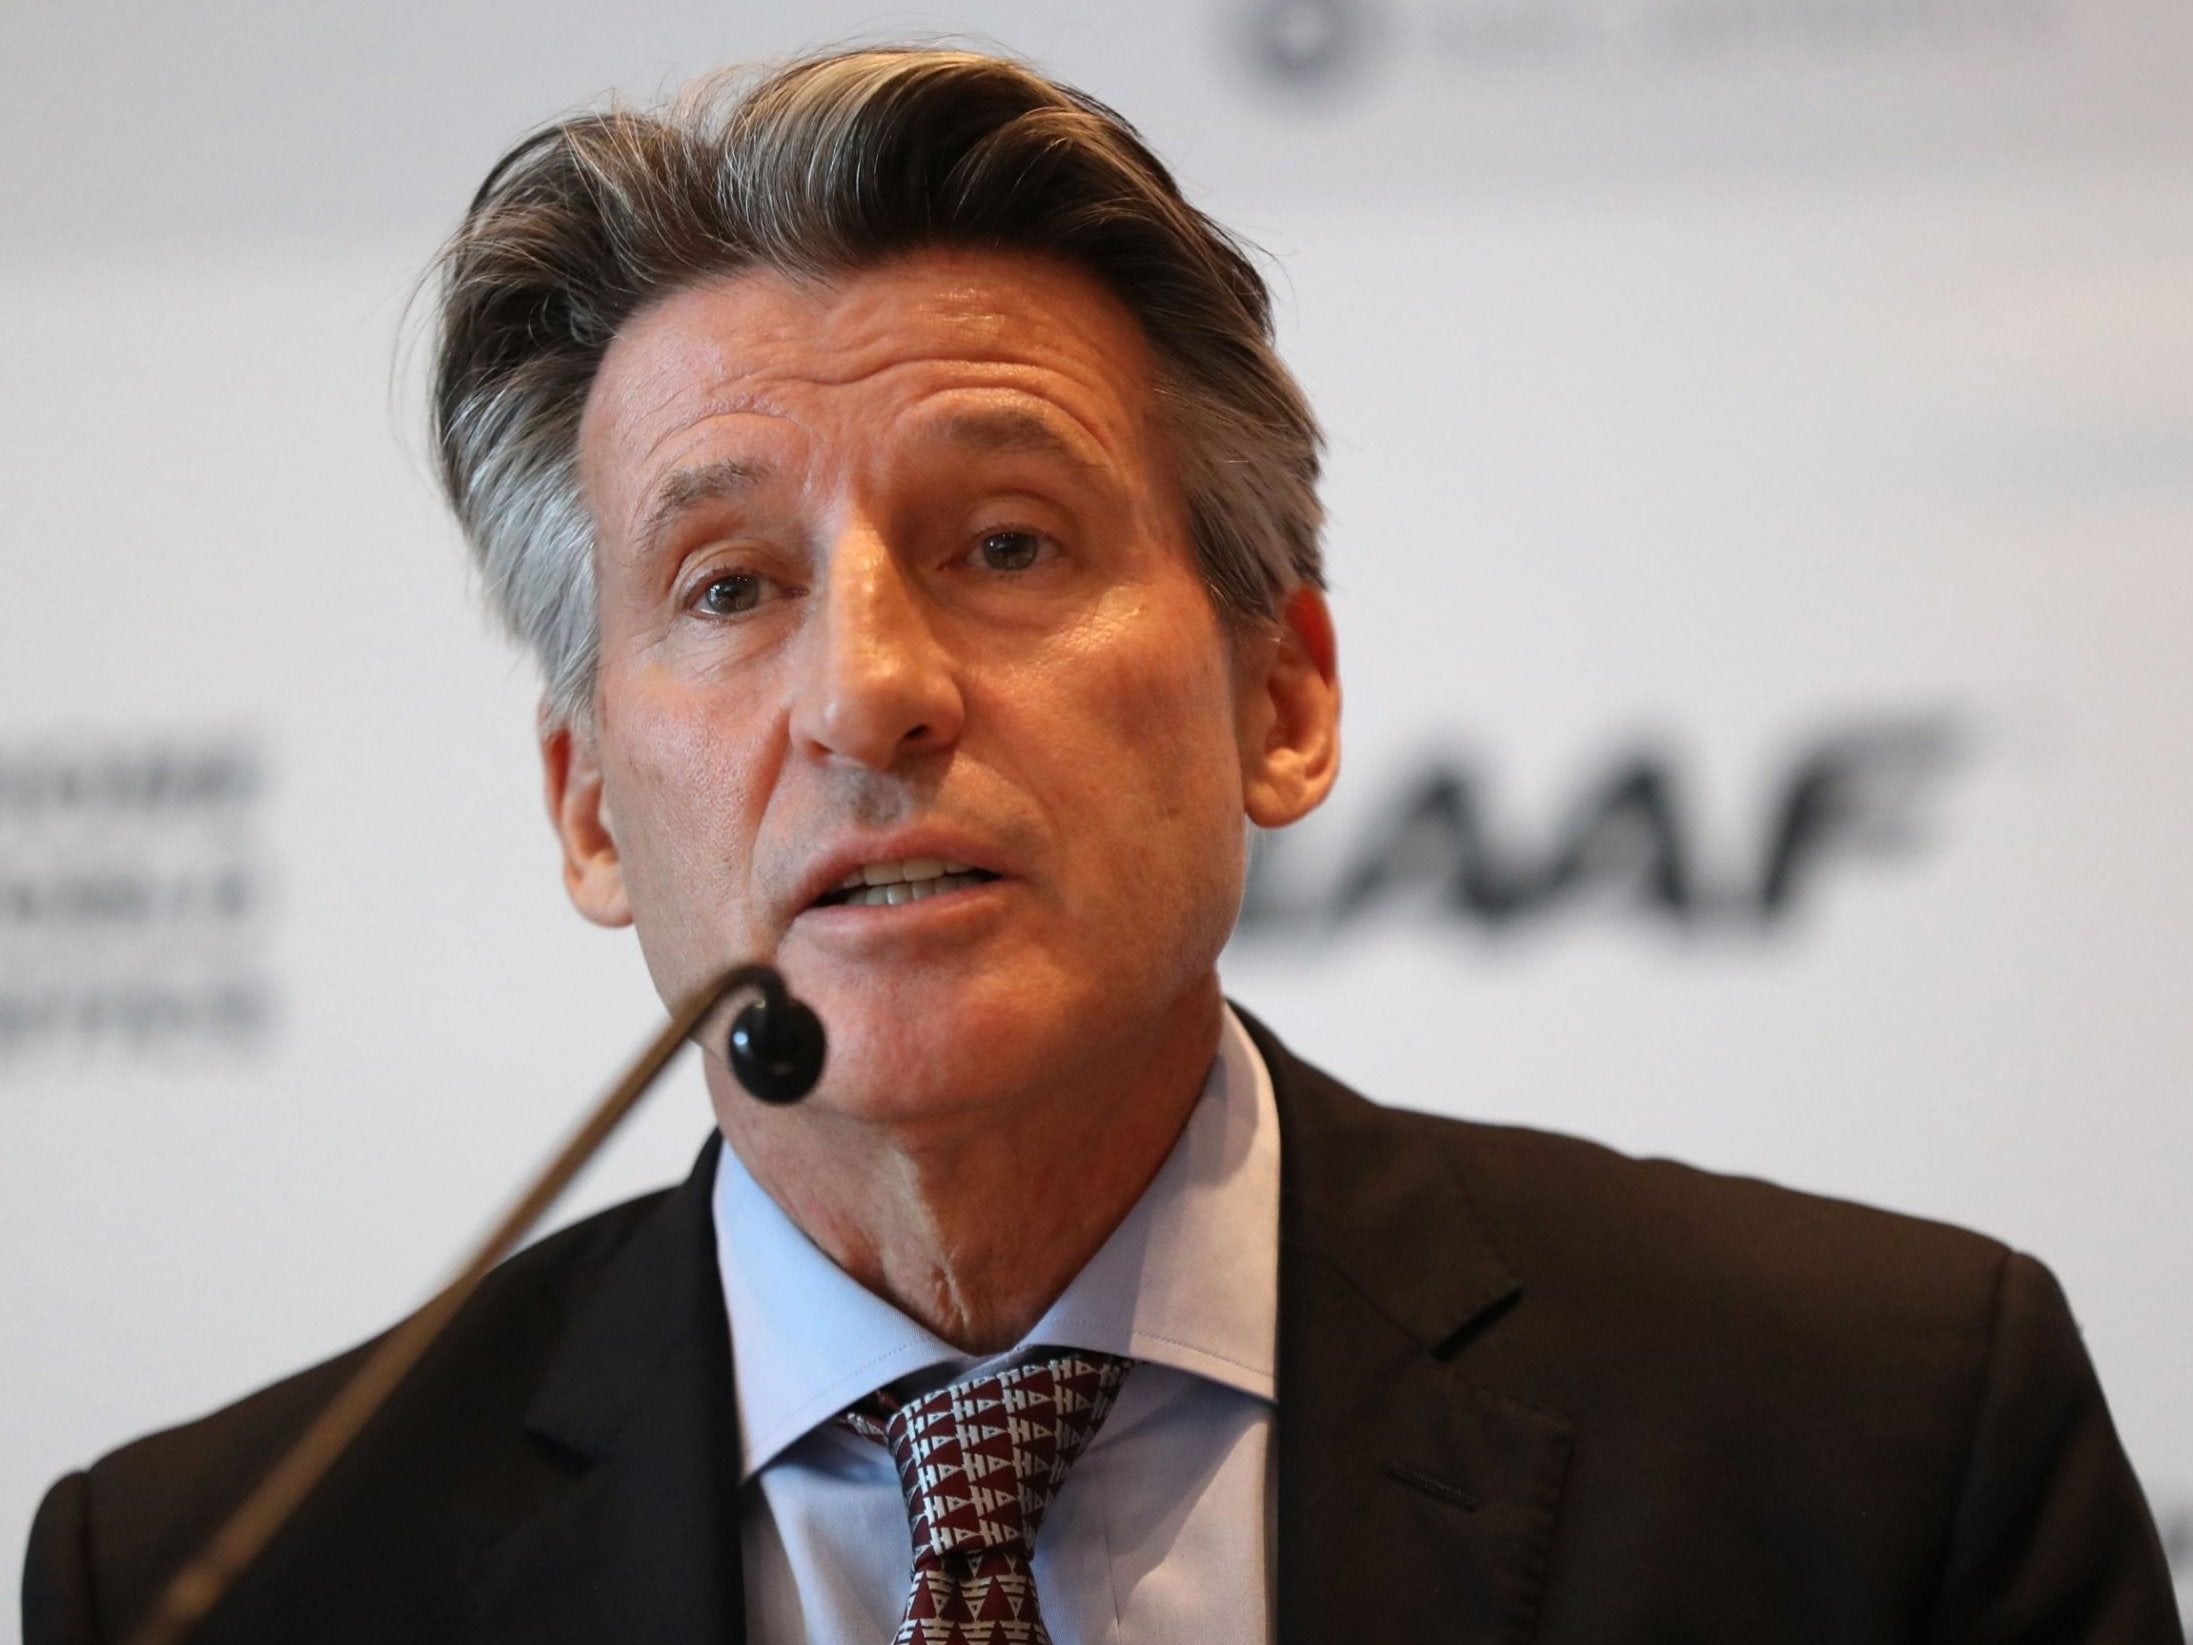 Lord Coe has been cleared of any wrongdoing